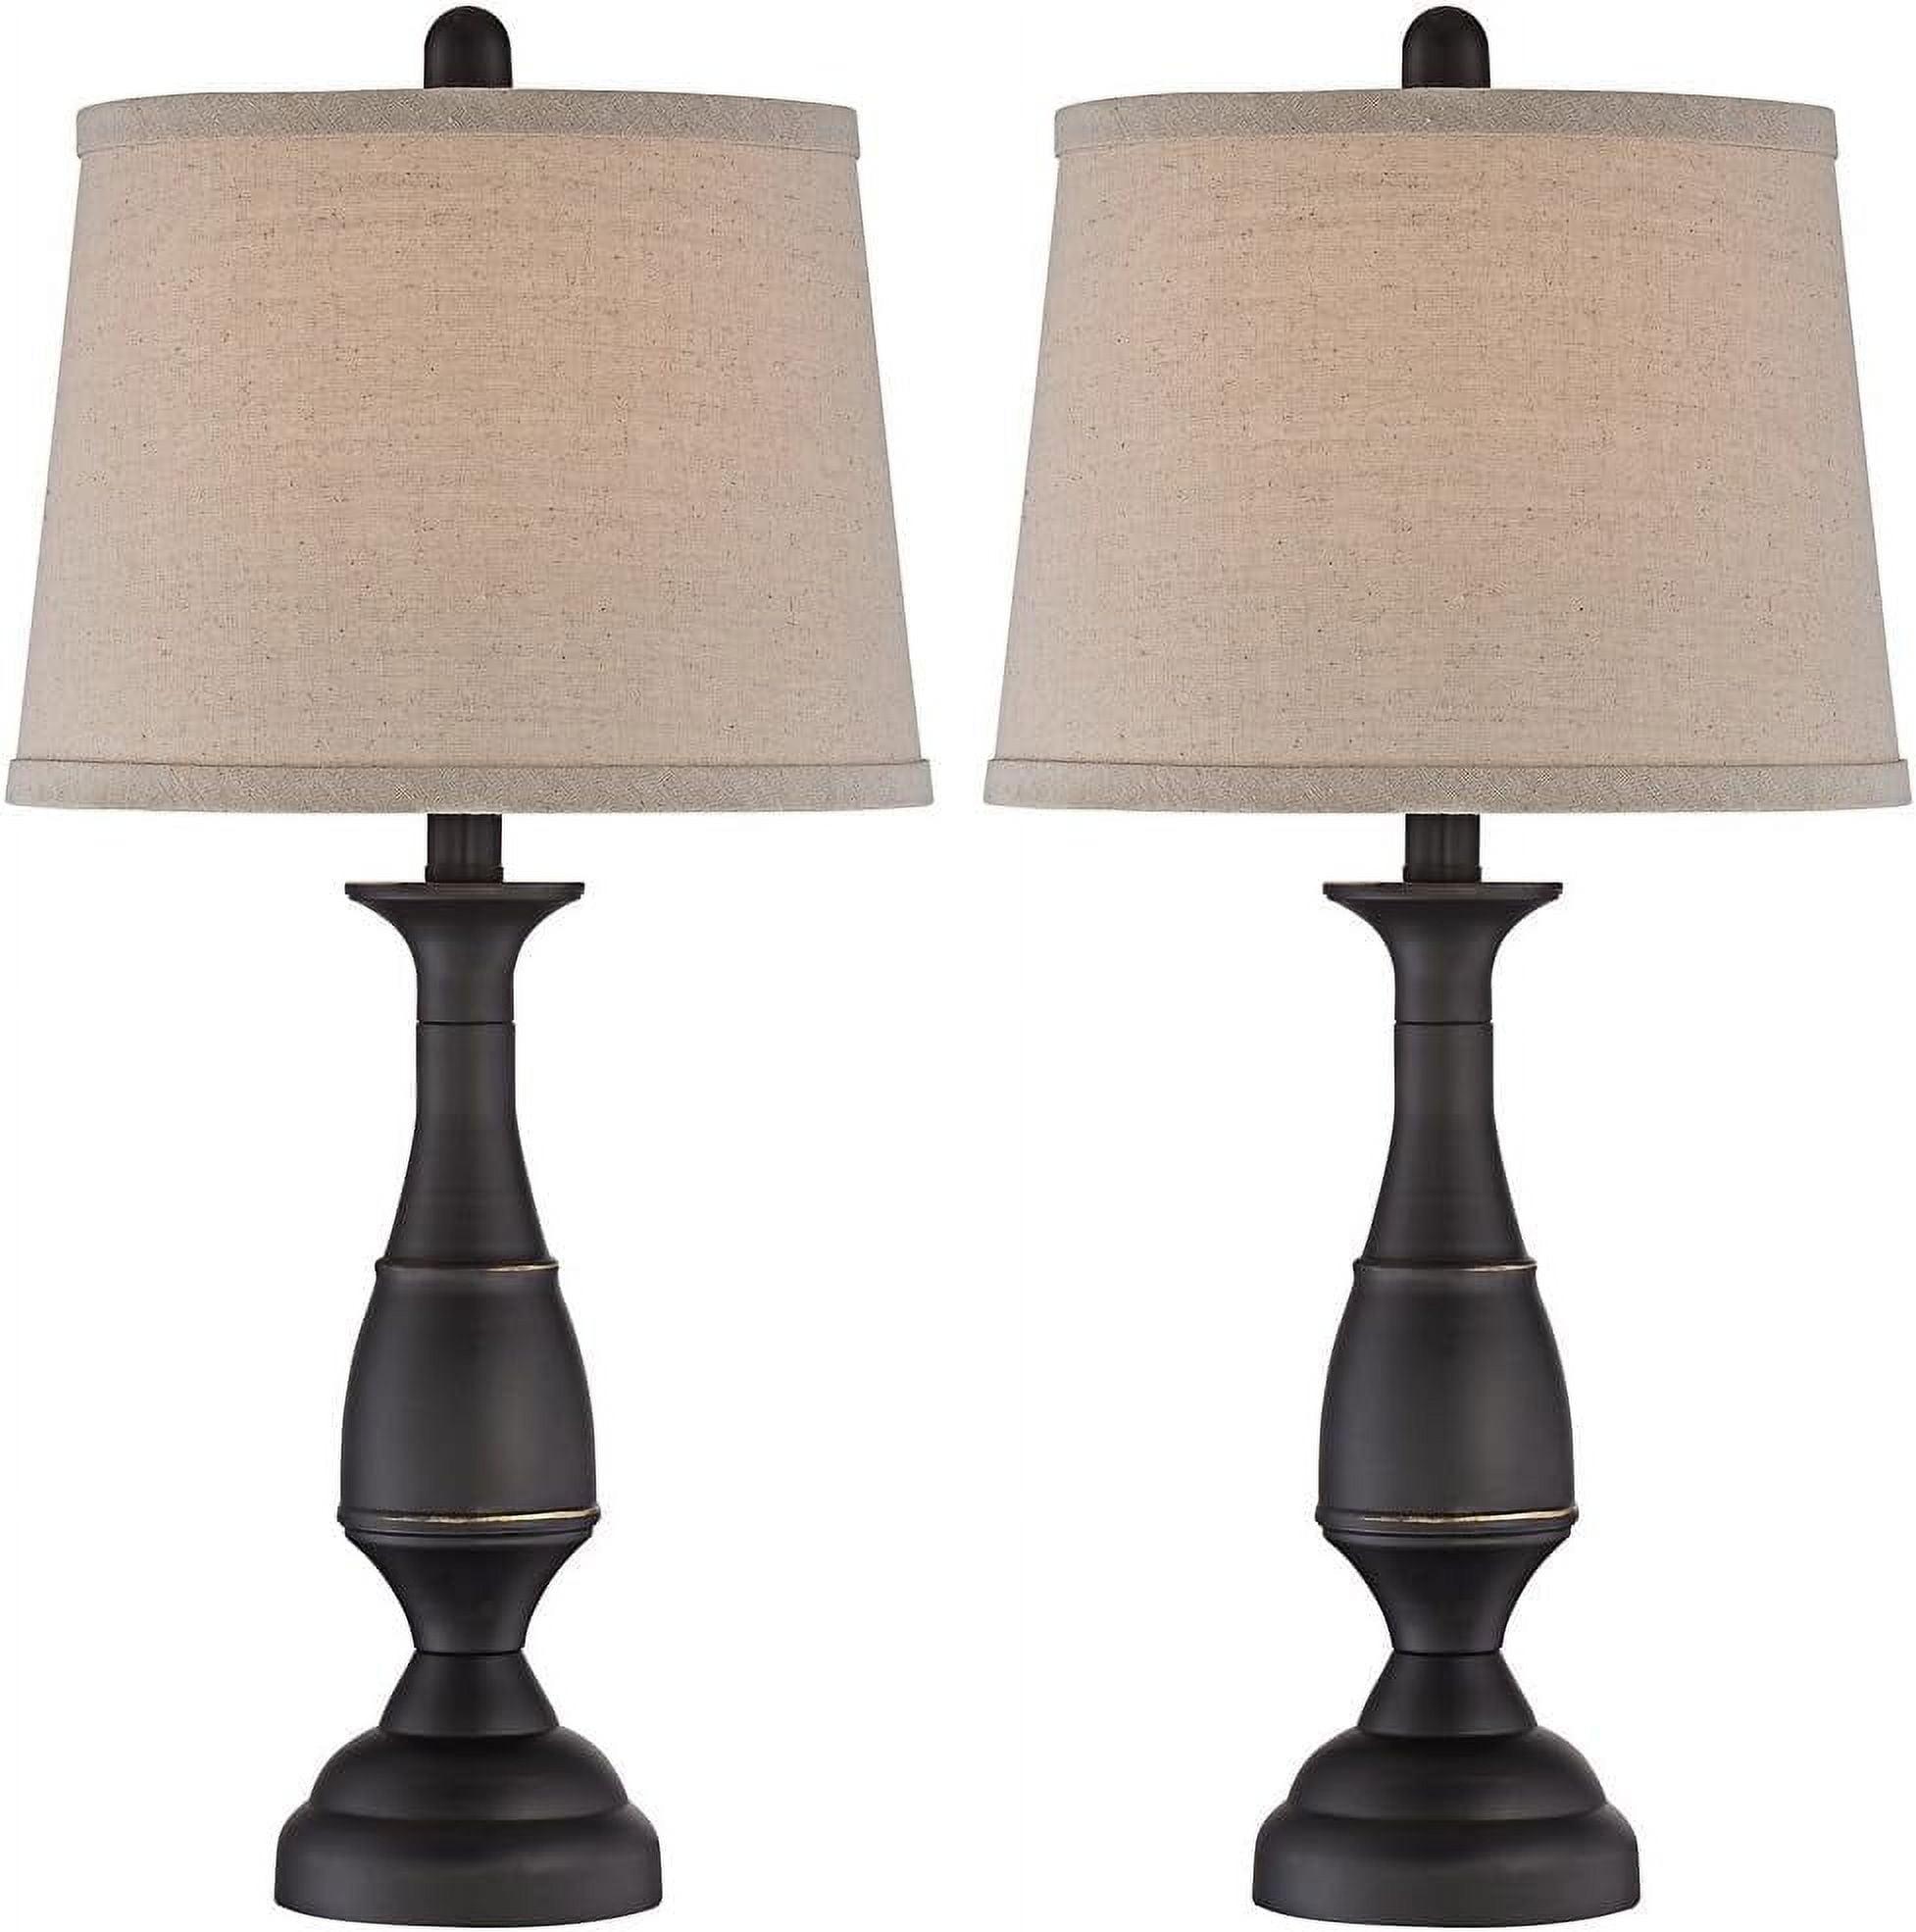 Rustic Farmhouse Dark Bronze Metal Table Lamp Set with Linen Drum Shades